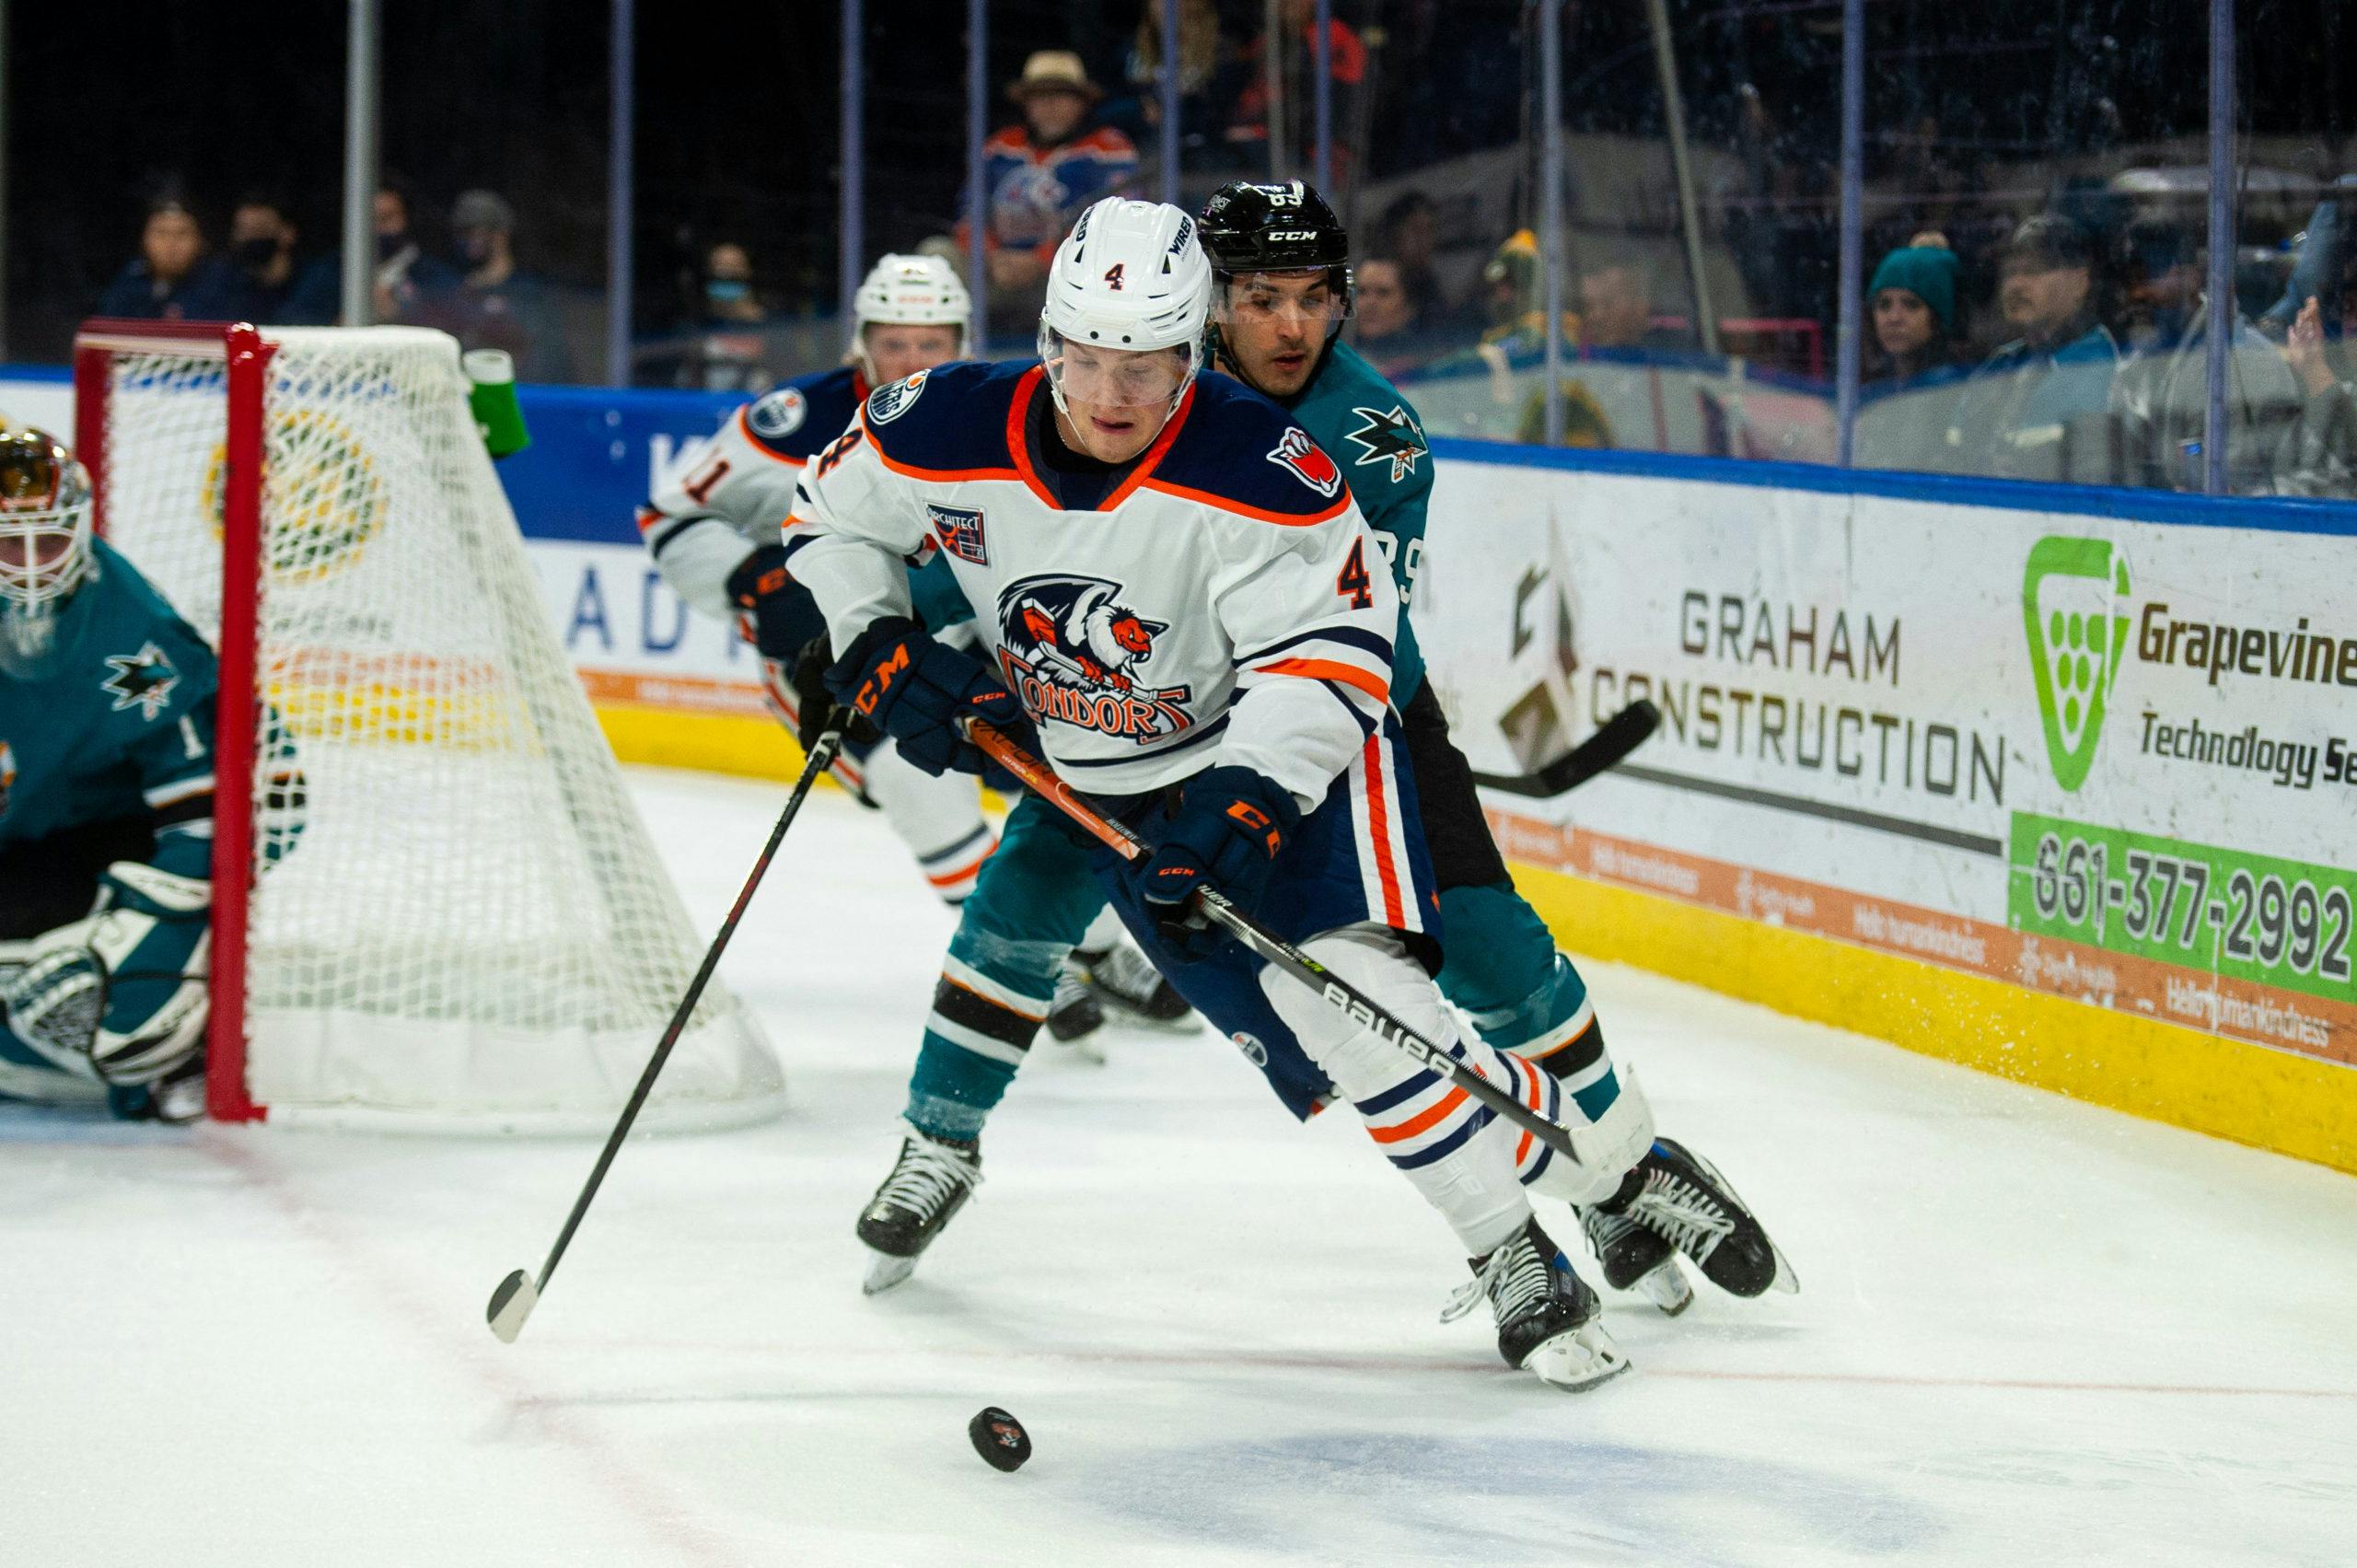 Edmonton Oilers prospect Dylan Holloway dominating in college